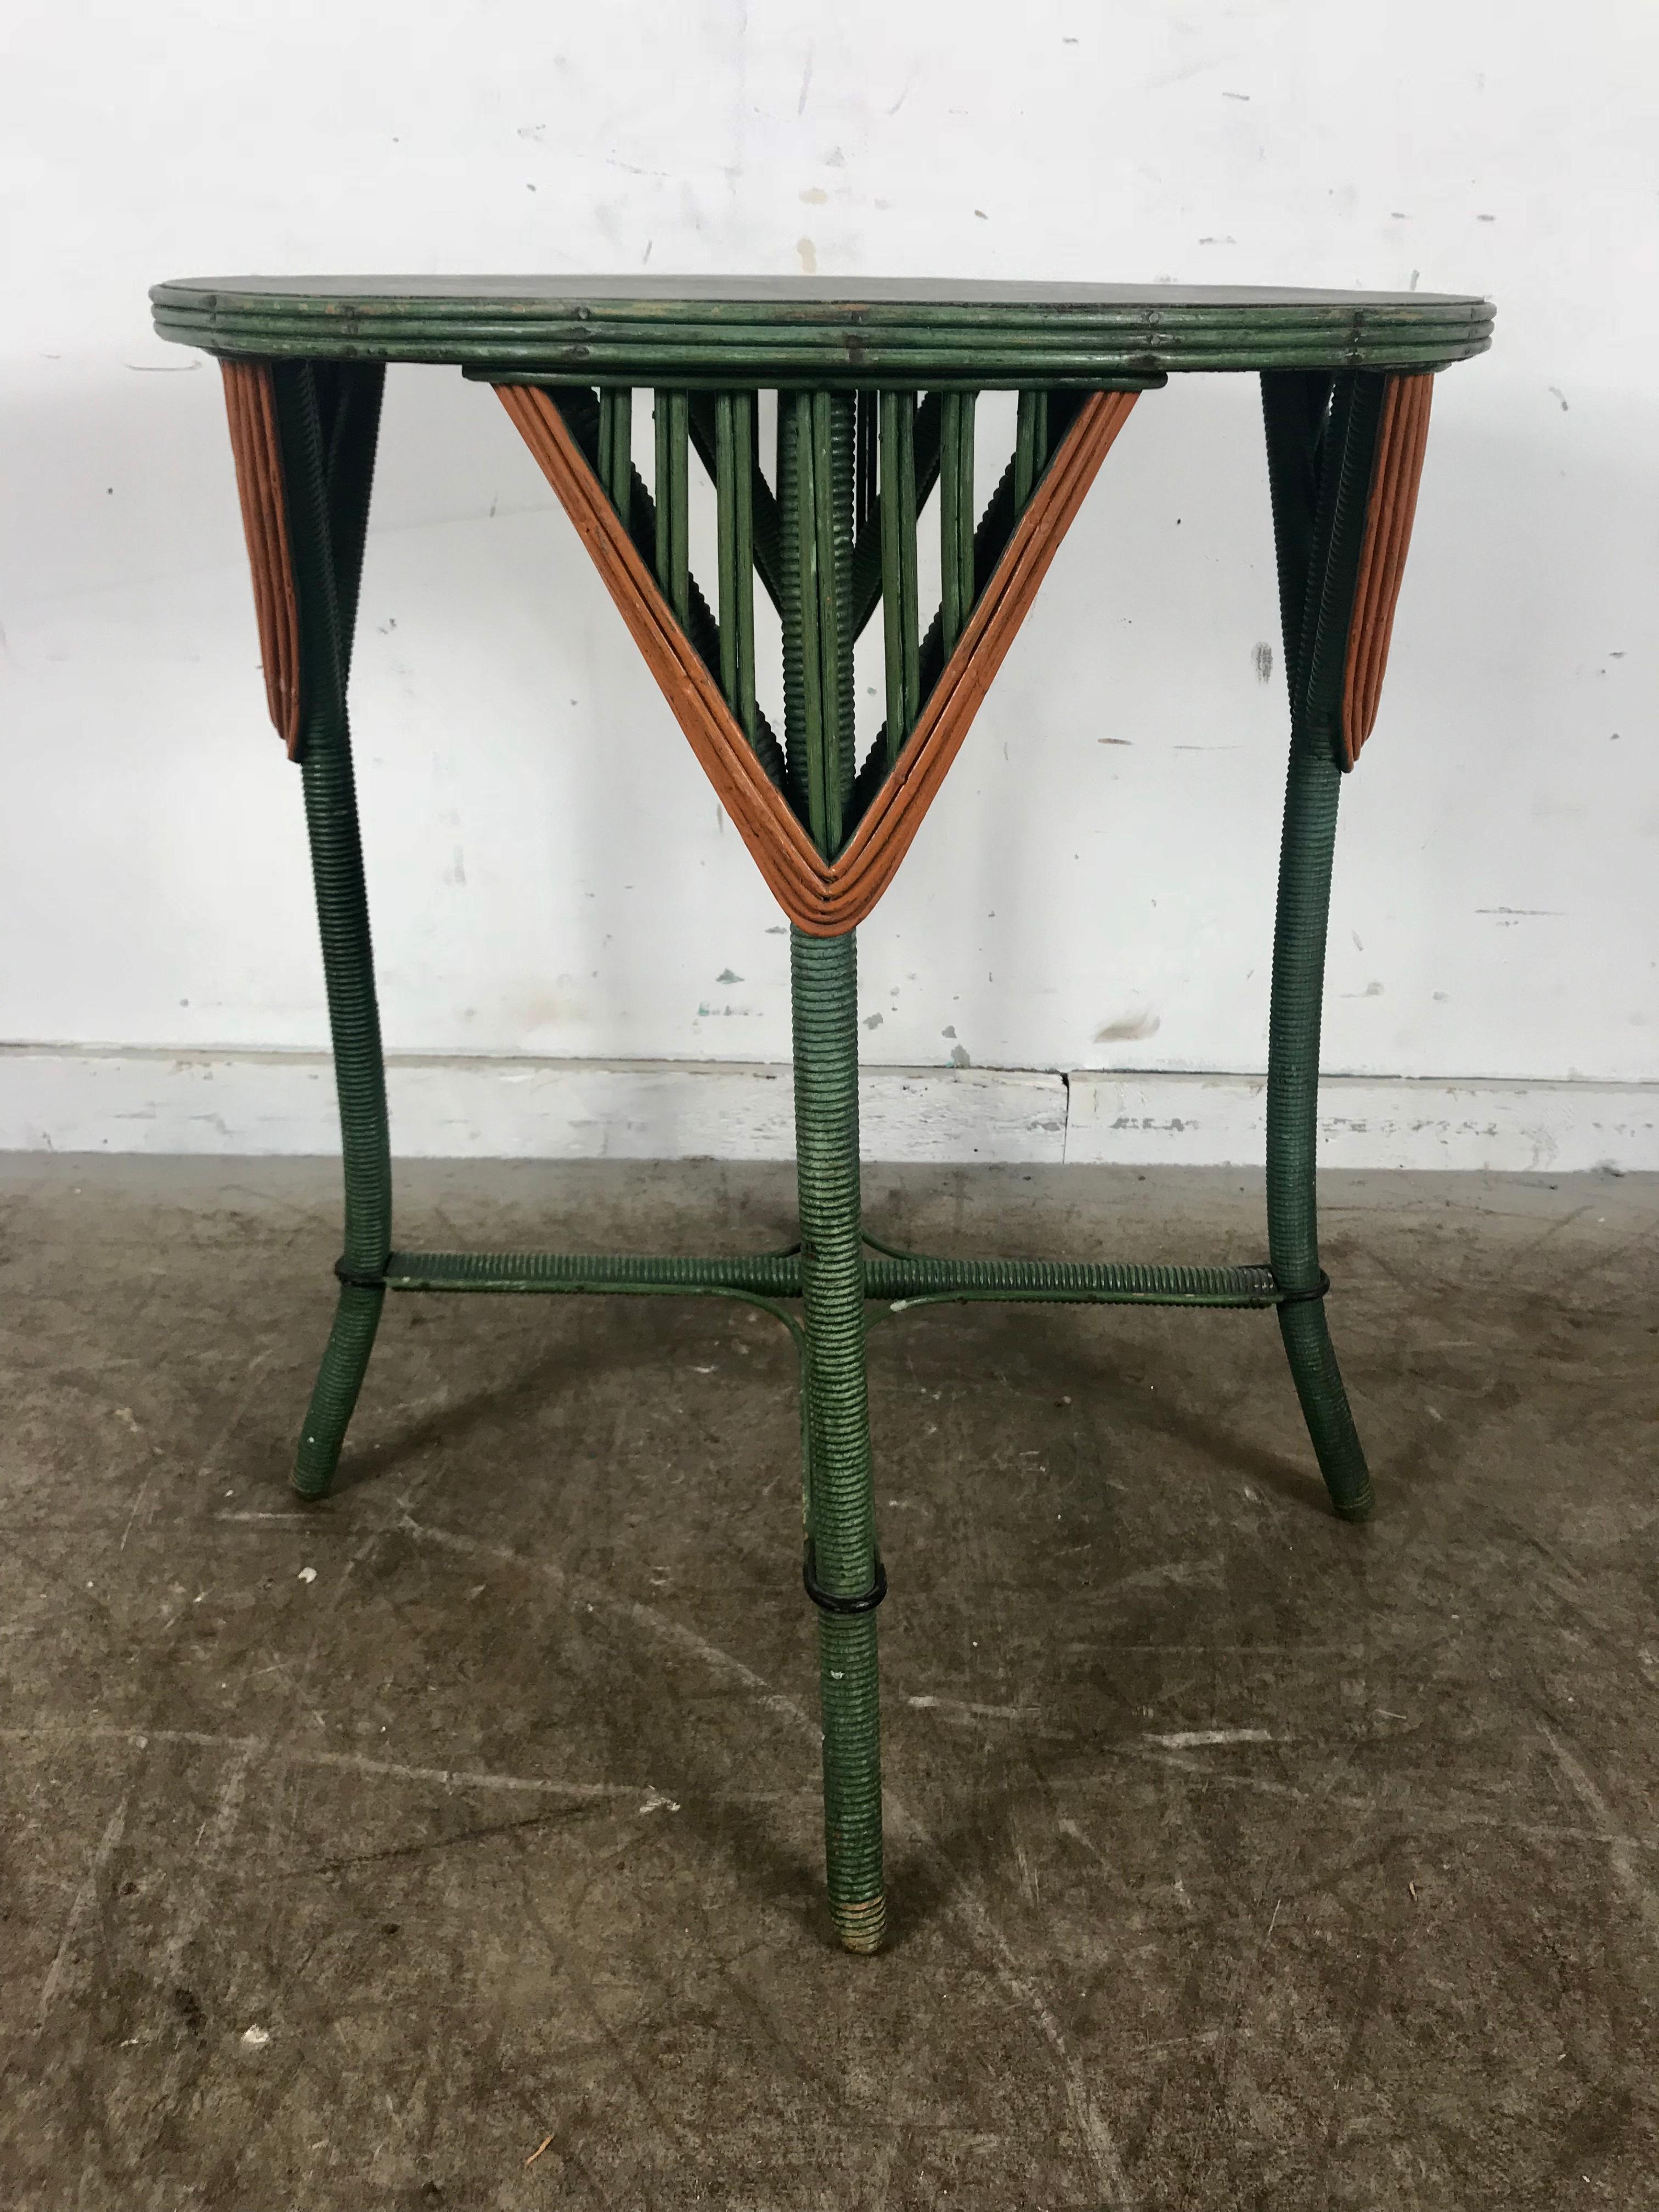 Art Deco split reed stick wicker lamp table, wonderful patina and color, structurally sound, nice old orange painted detailing.